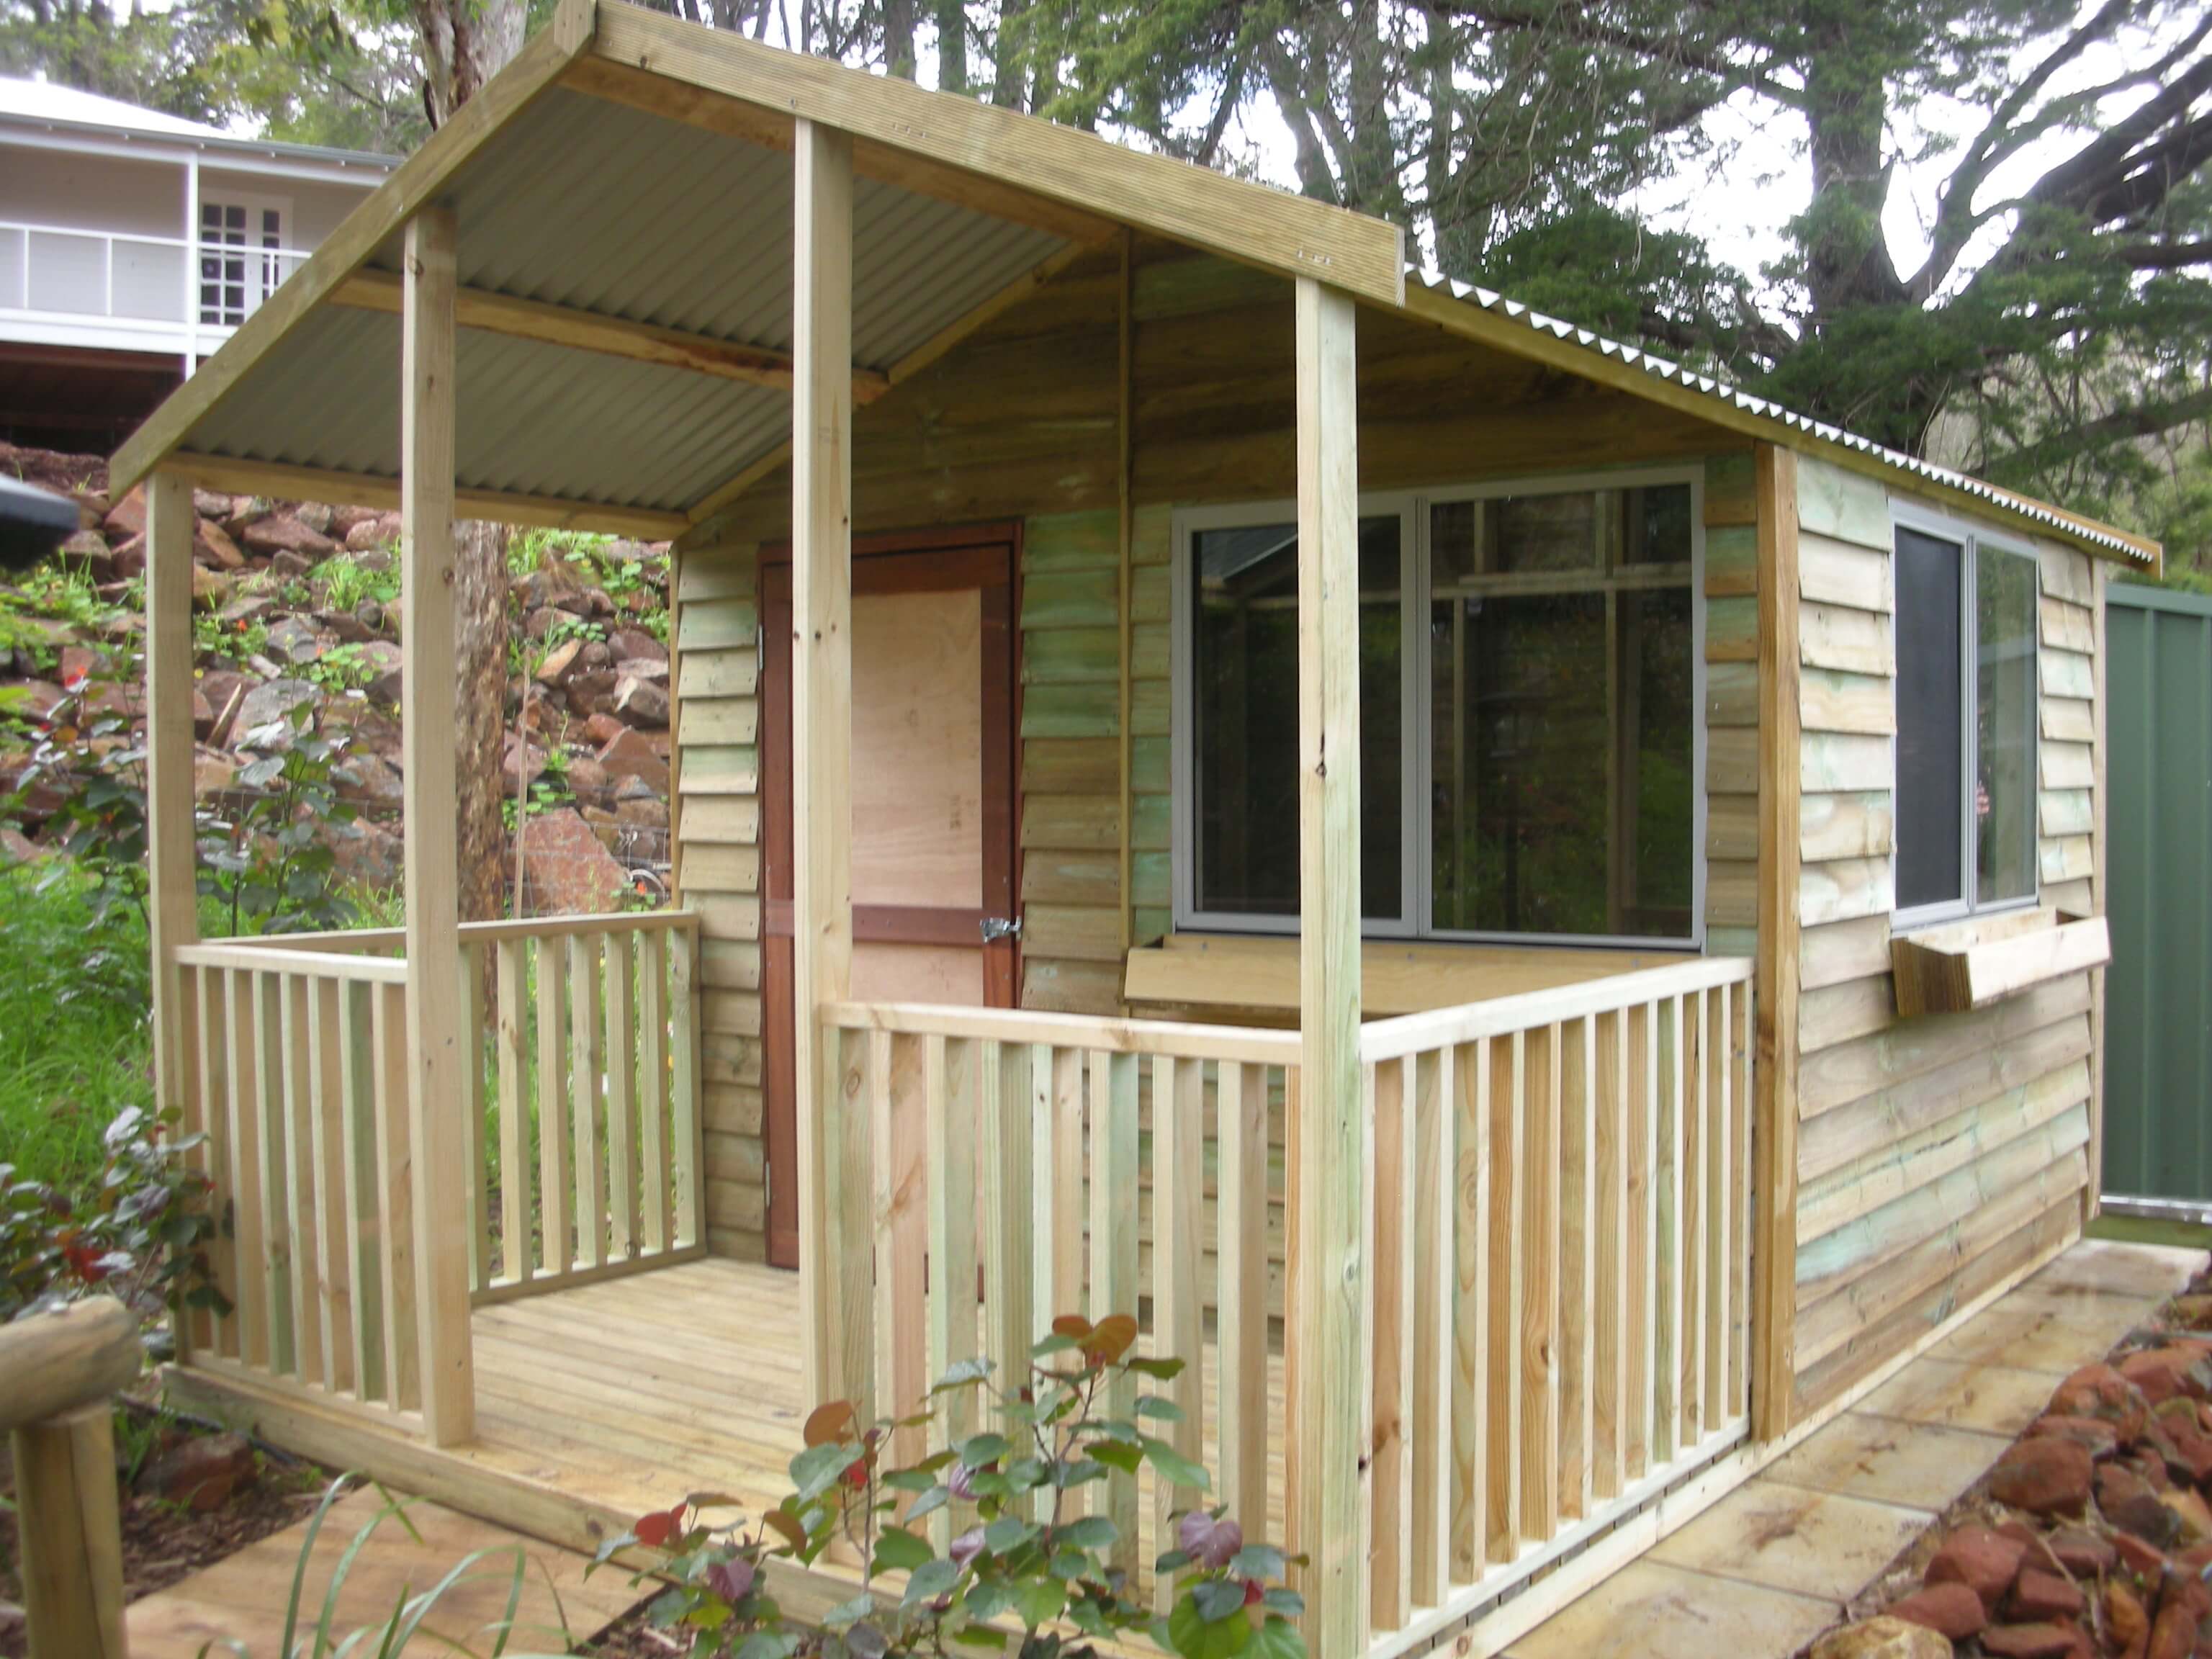 2.8m x 4.2m shed with veranda - For Your Backyard